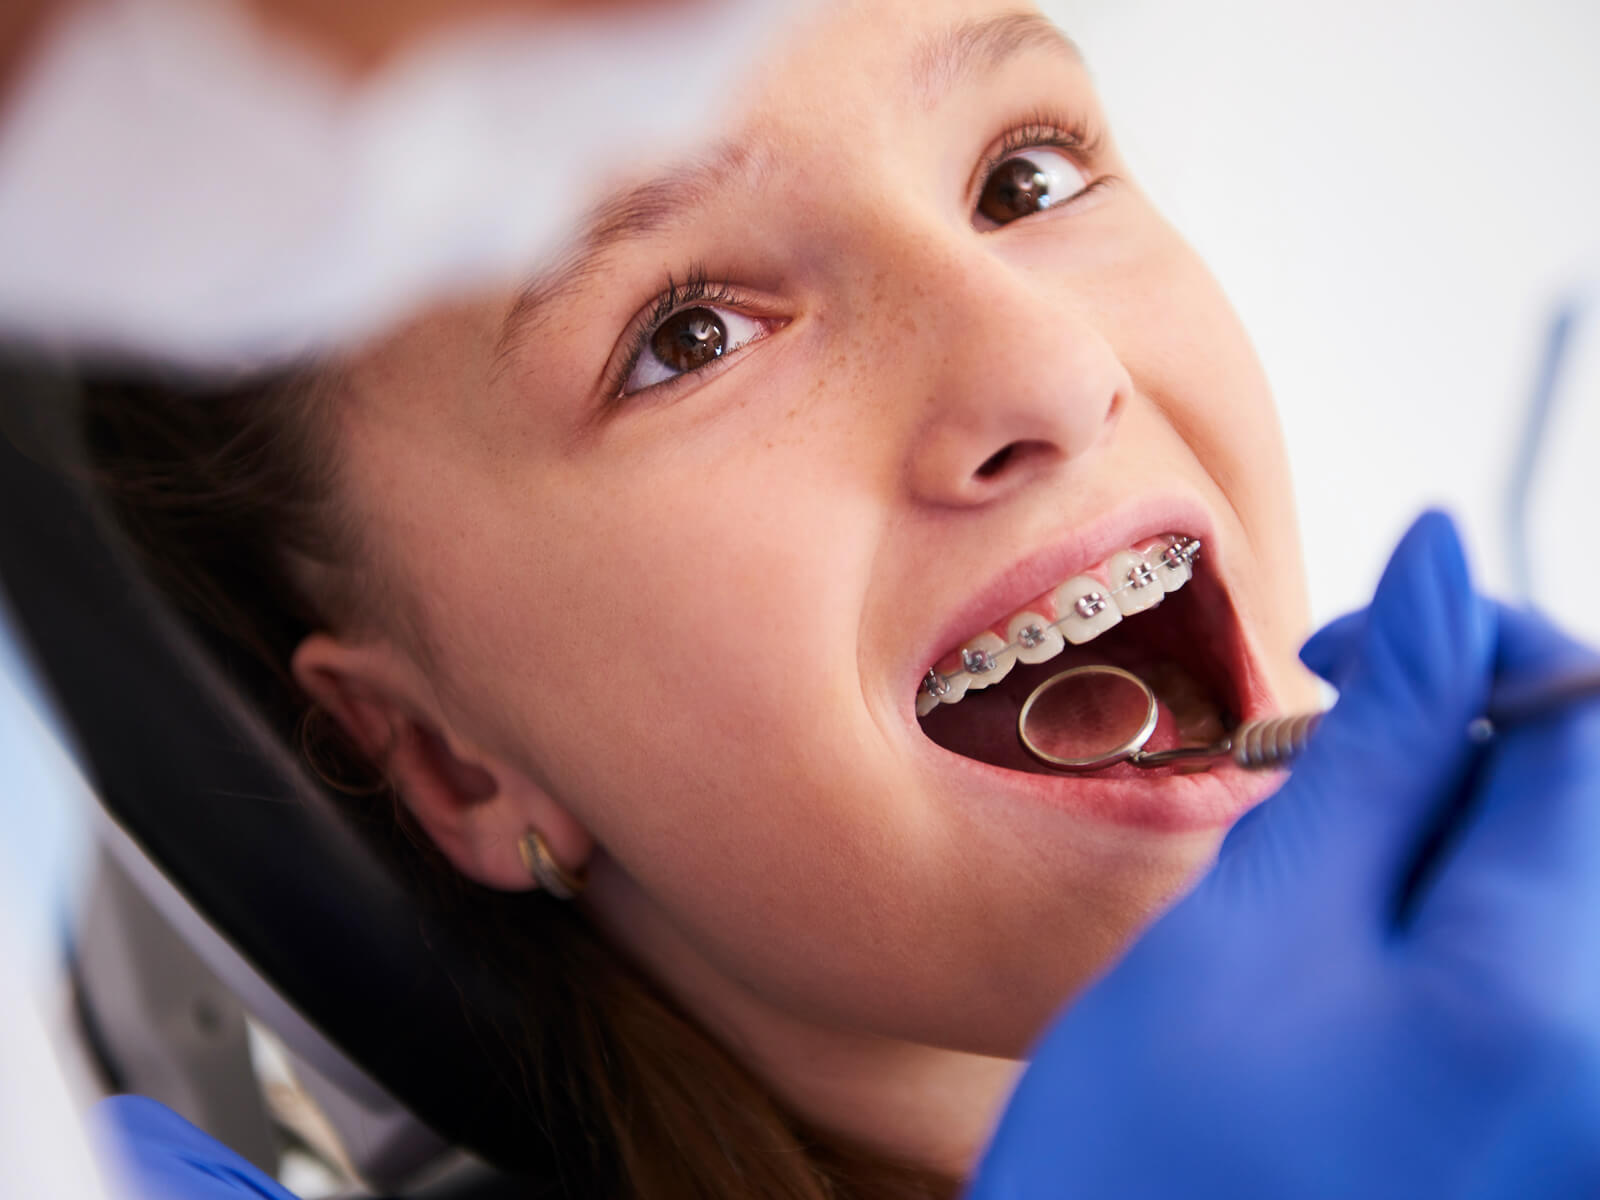 4 Tips That Help Prevent Tooth Decay With Braces